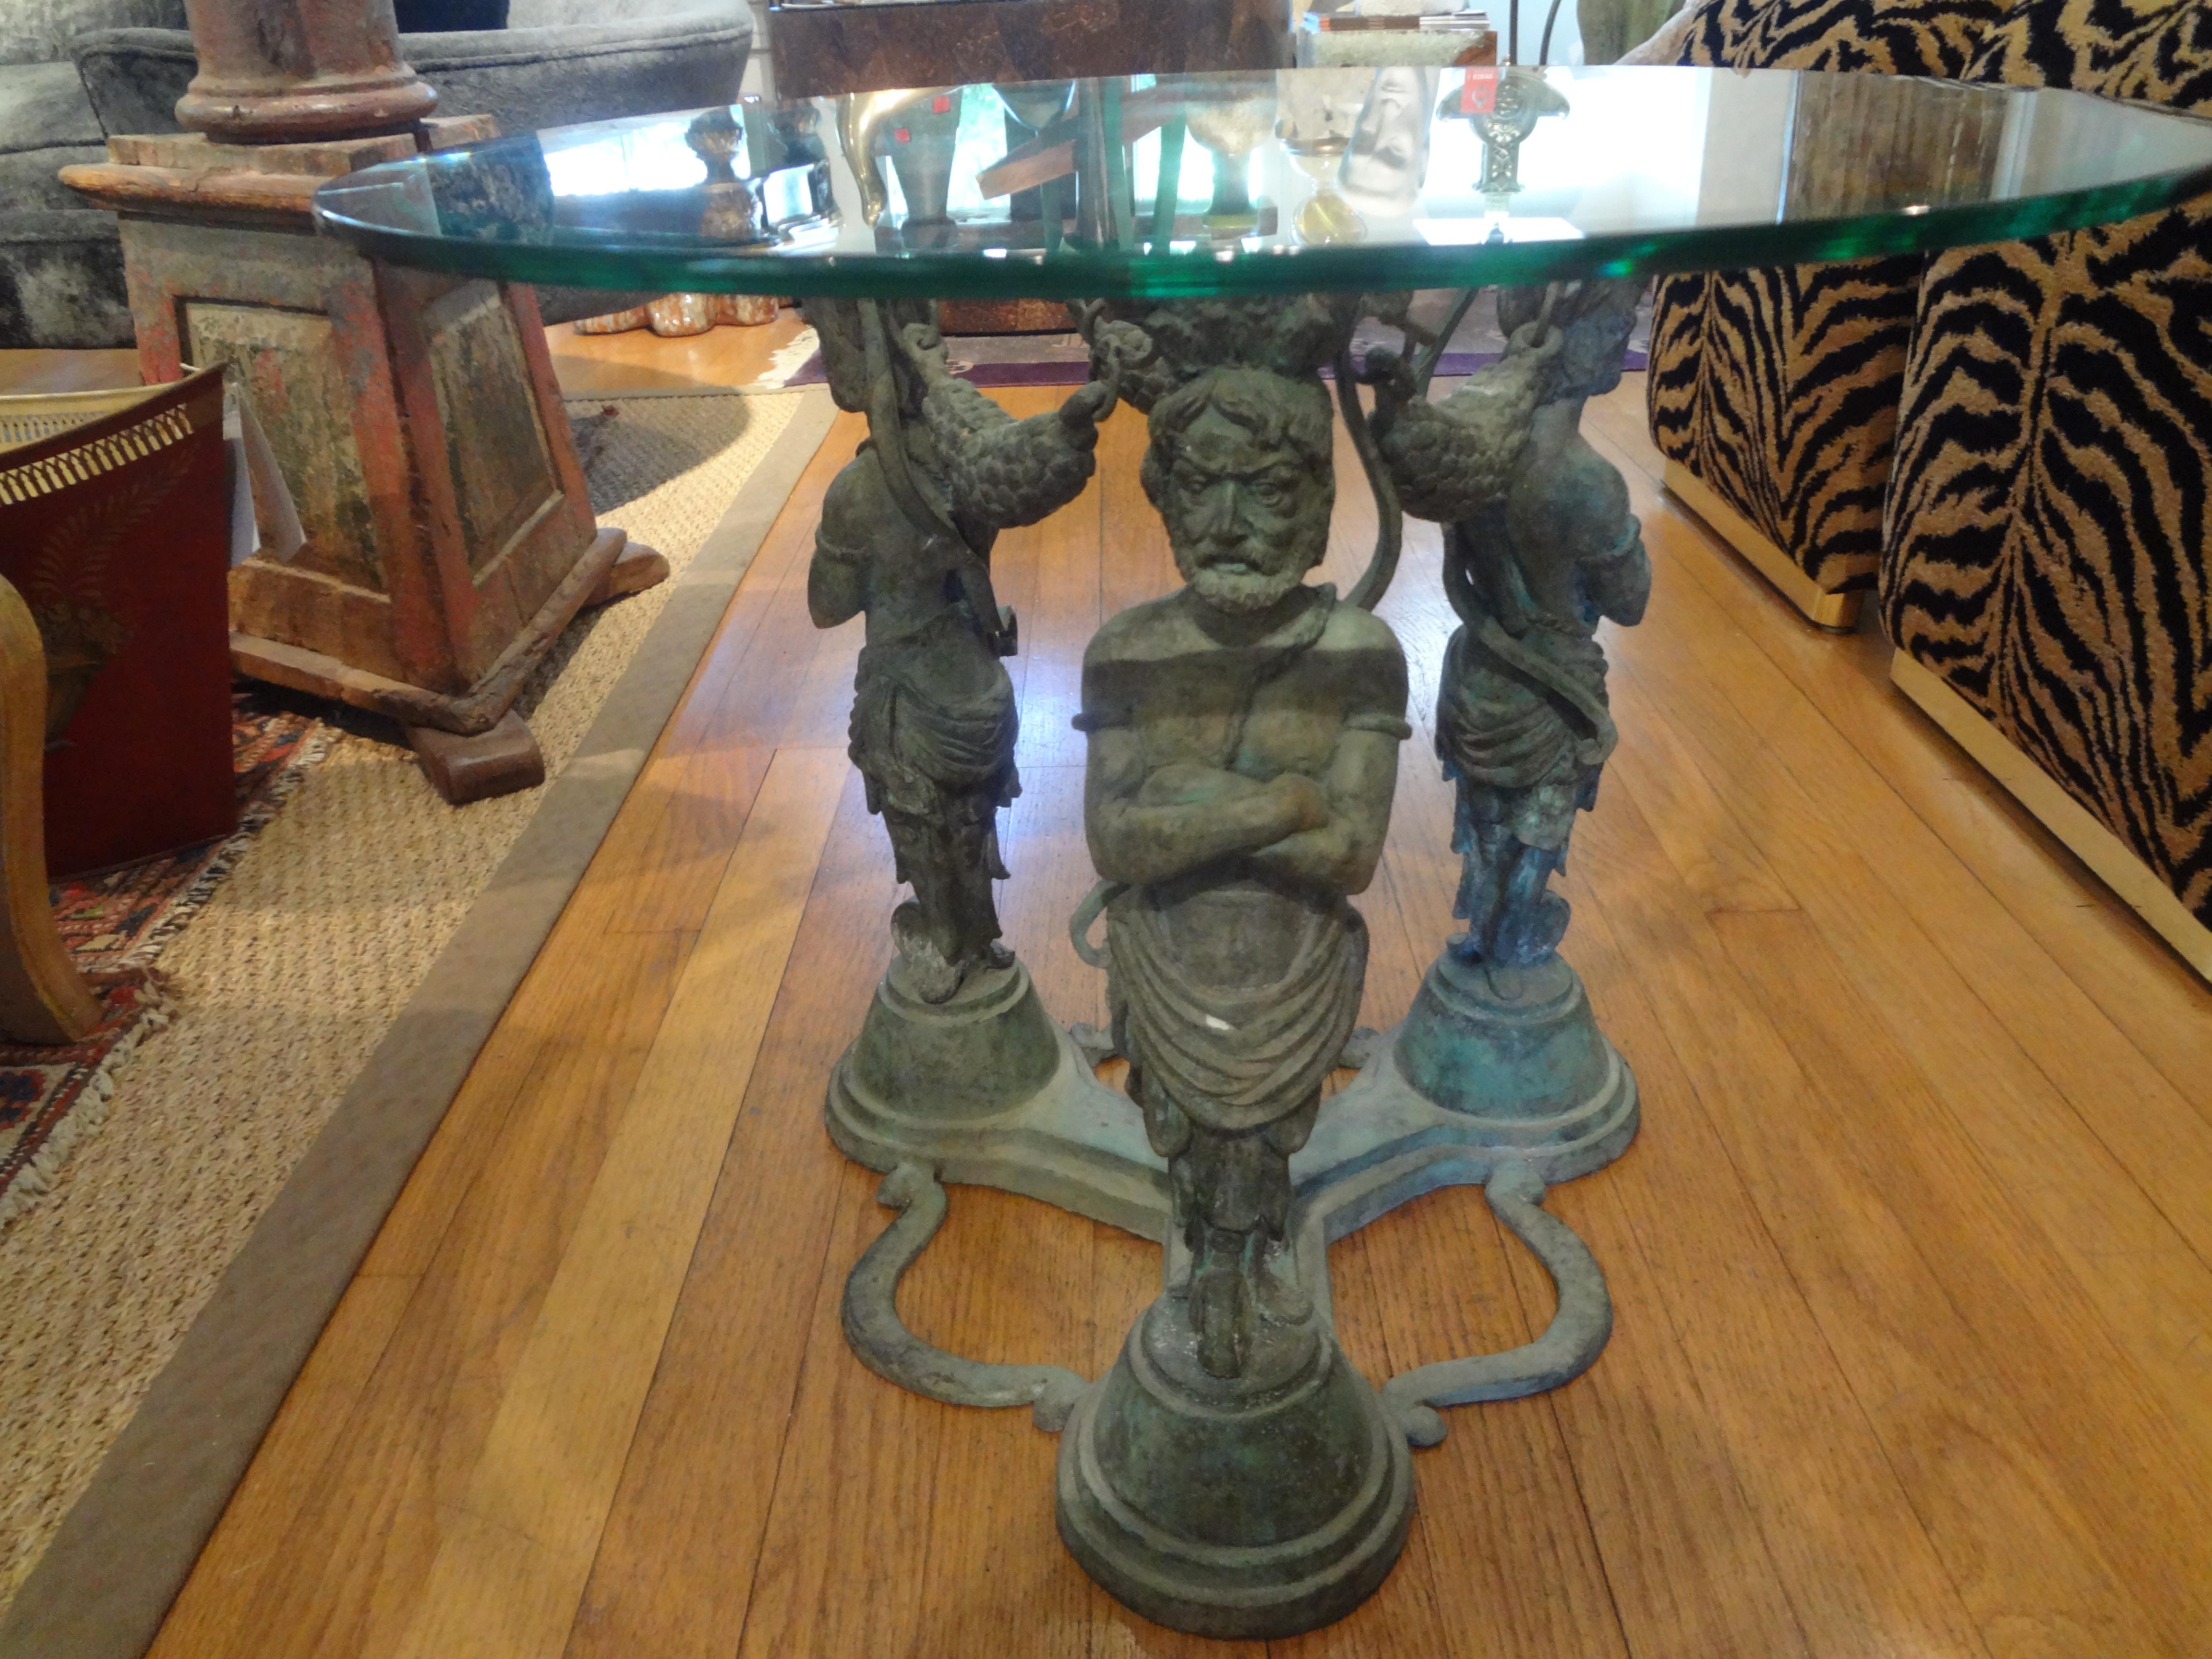 Pair of vintage bronze Grecian inspired tables. This matching pair of Greco-Roman style tables, side tables, gueridons, or drink tables have round beveled glass tops and would work well in many interiors. Stunning!